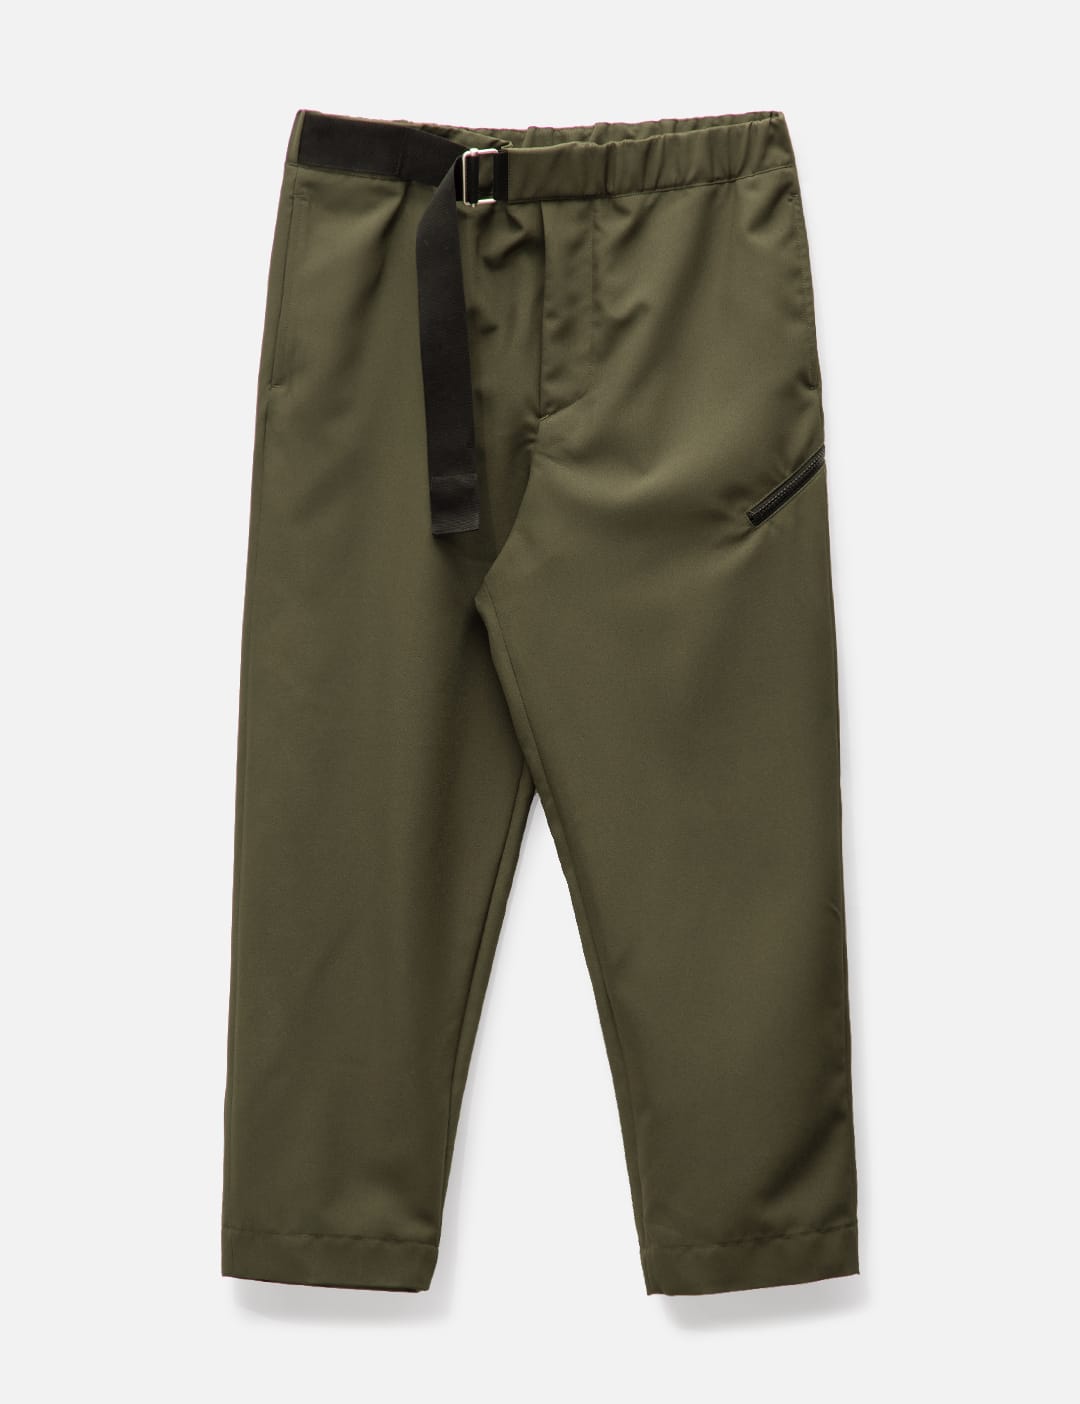 Engineered Garments - FATIGUE PANTS | HBX - Globally Curated 